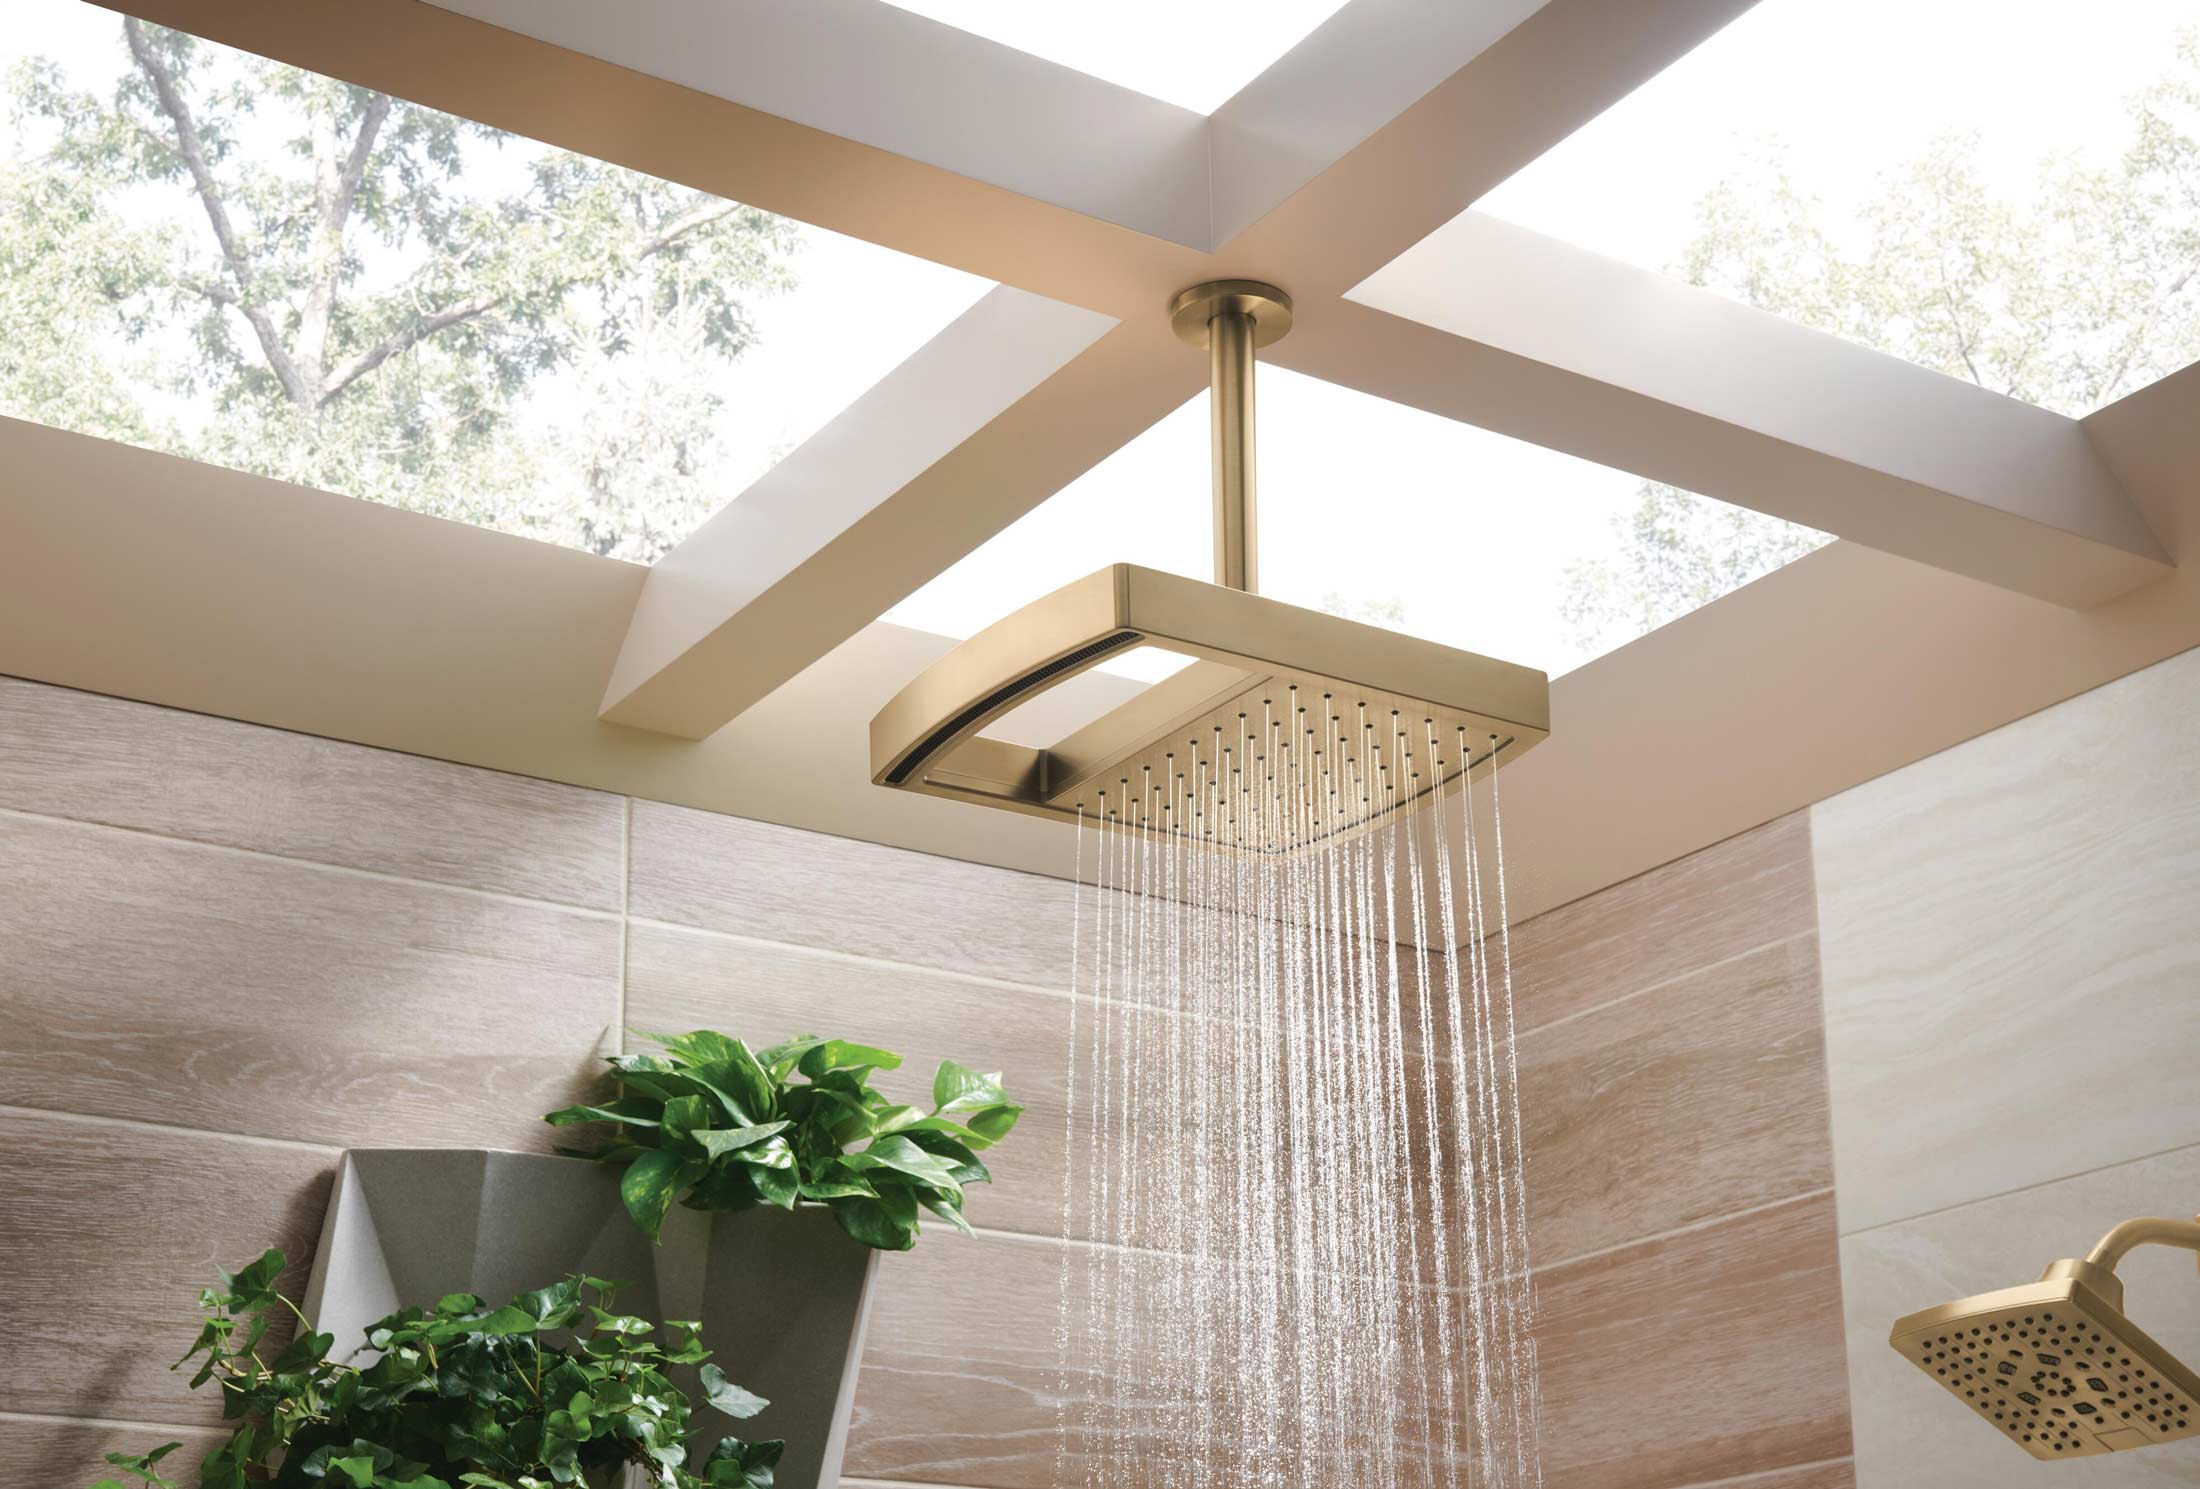 A gold trimmed rainfall shower on the ceiling of an open roof bathroom